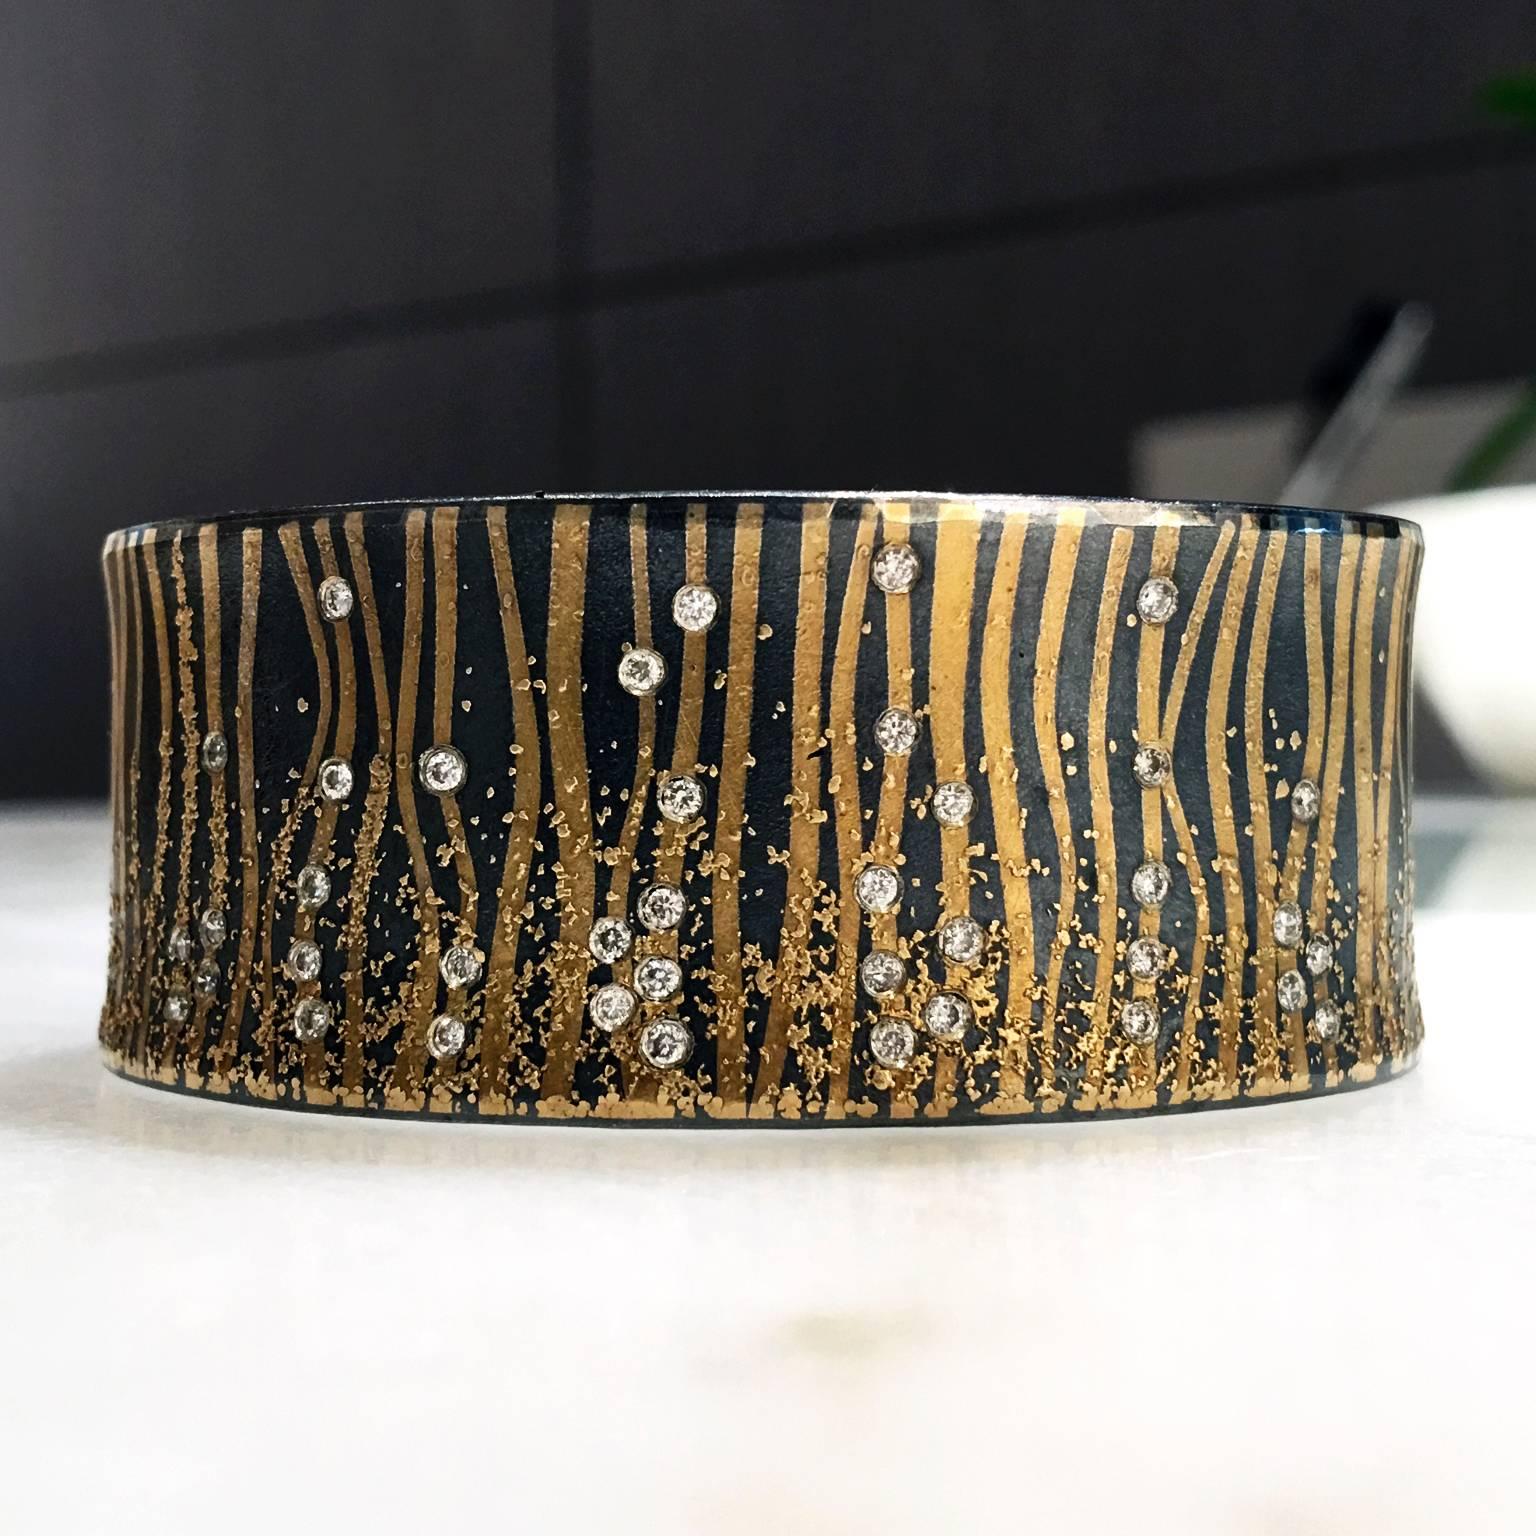 One of a Kind Narrow Cuff by internationally acclaimed jewelry studio Atelier Zobel and artist Peter Schmid, handcrafted in 24k gold and oxidized sterling silver with bezel-set round brilliant-cut diamonds totaling 0.39 carats. 1 in. opening
